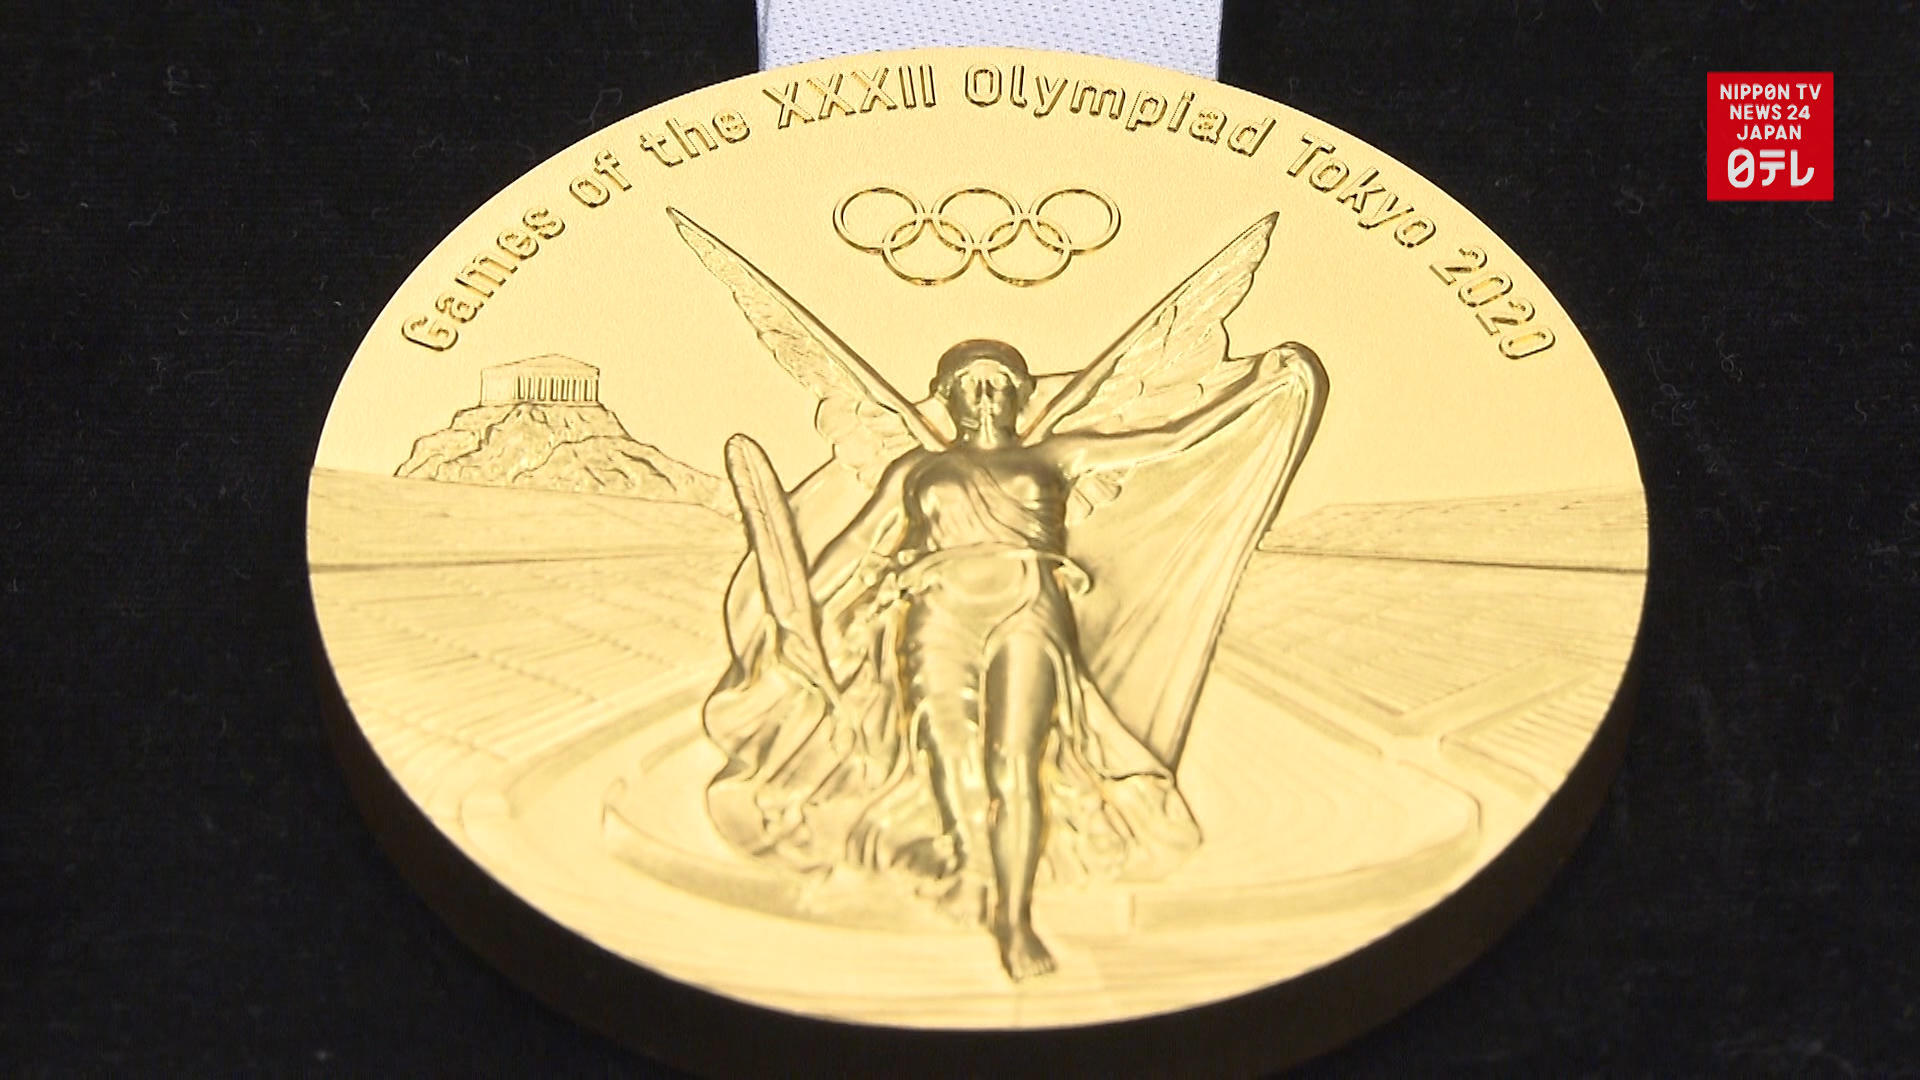 Medals unveiled on 1-yr Olympic countdown